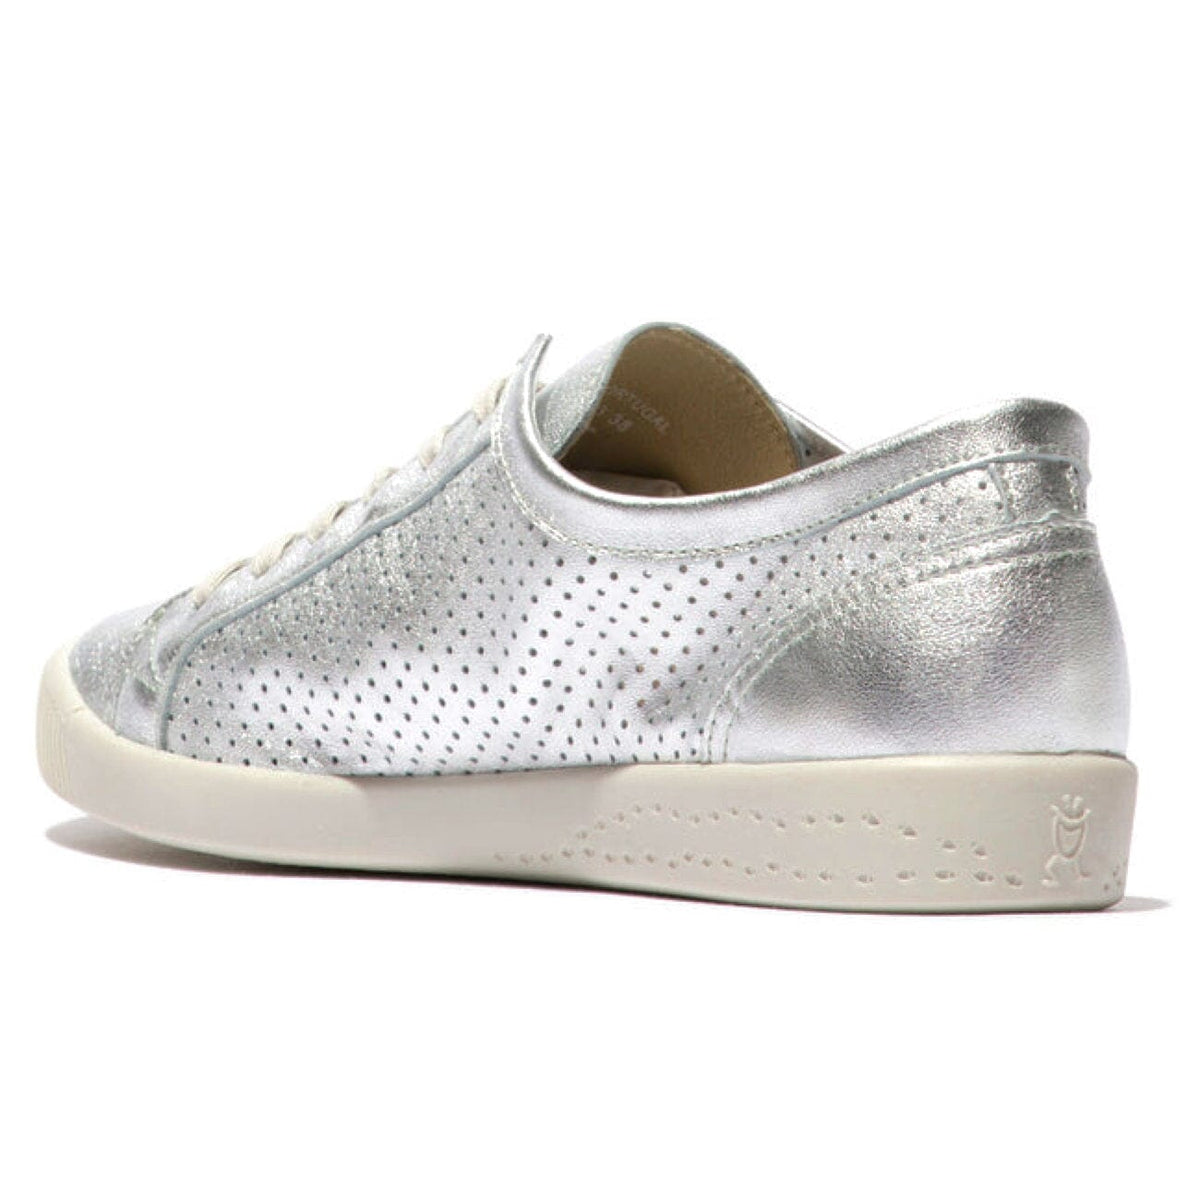 Softinos, Ica388, Laceup Shoe, Laminato Leather, Silver Shoes Softinos 